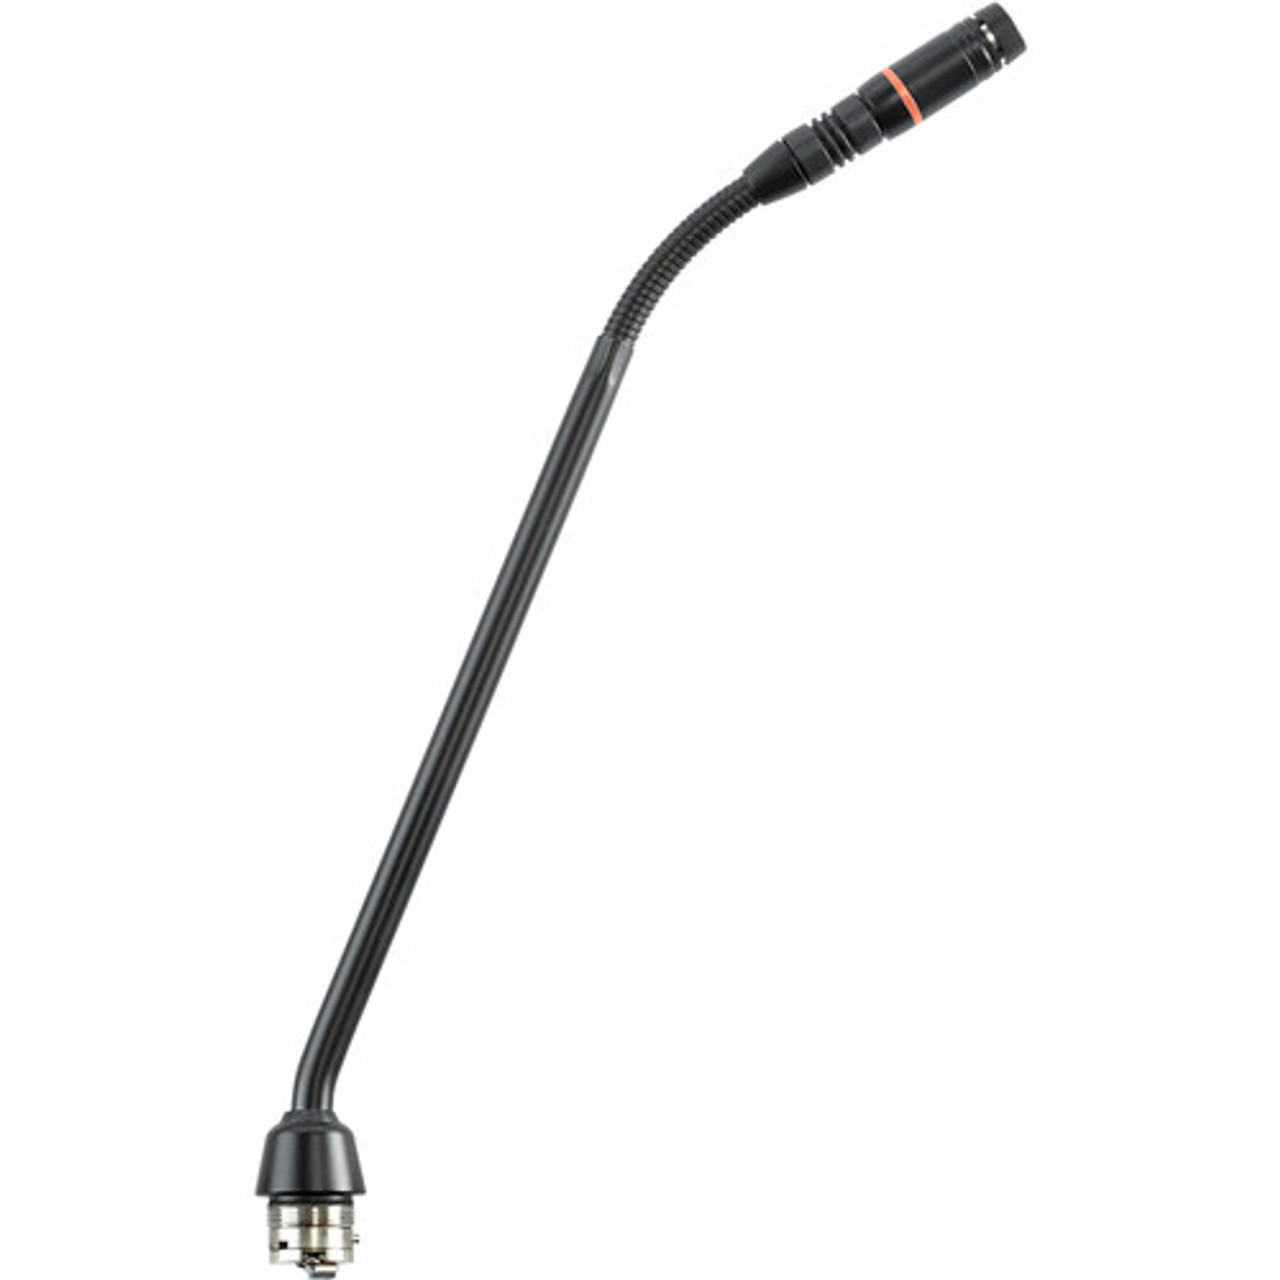 Shure MX410RLP/S 10" Gooseneck Mic with Supercardioid Capsule, No Preamp, and Red LED Ring on Top (MX410RLP/S)